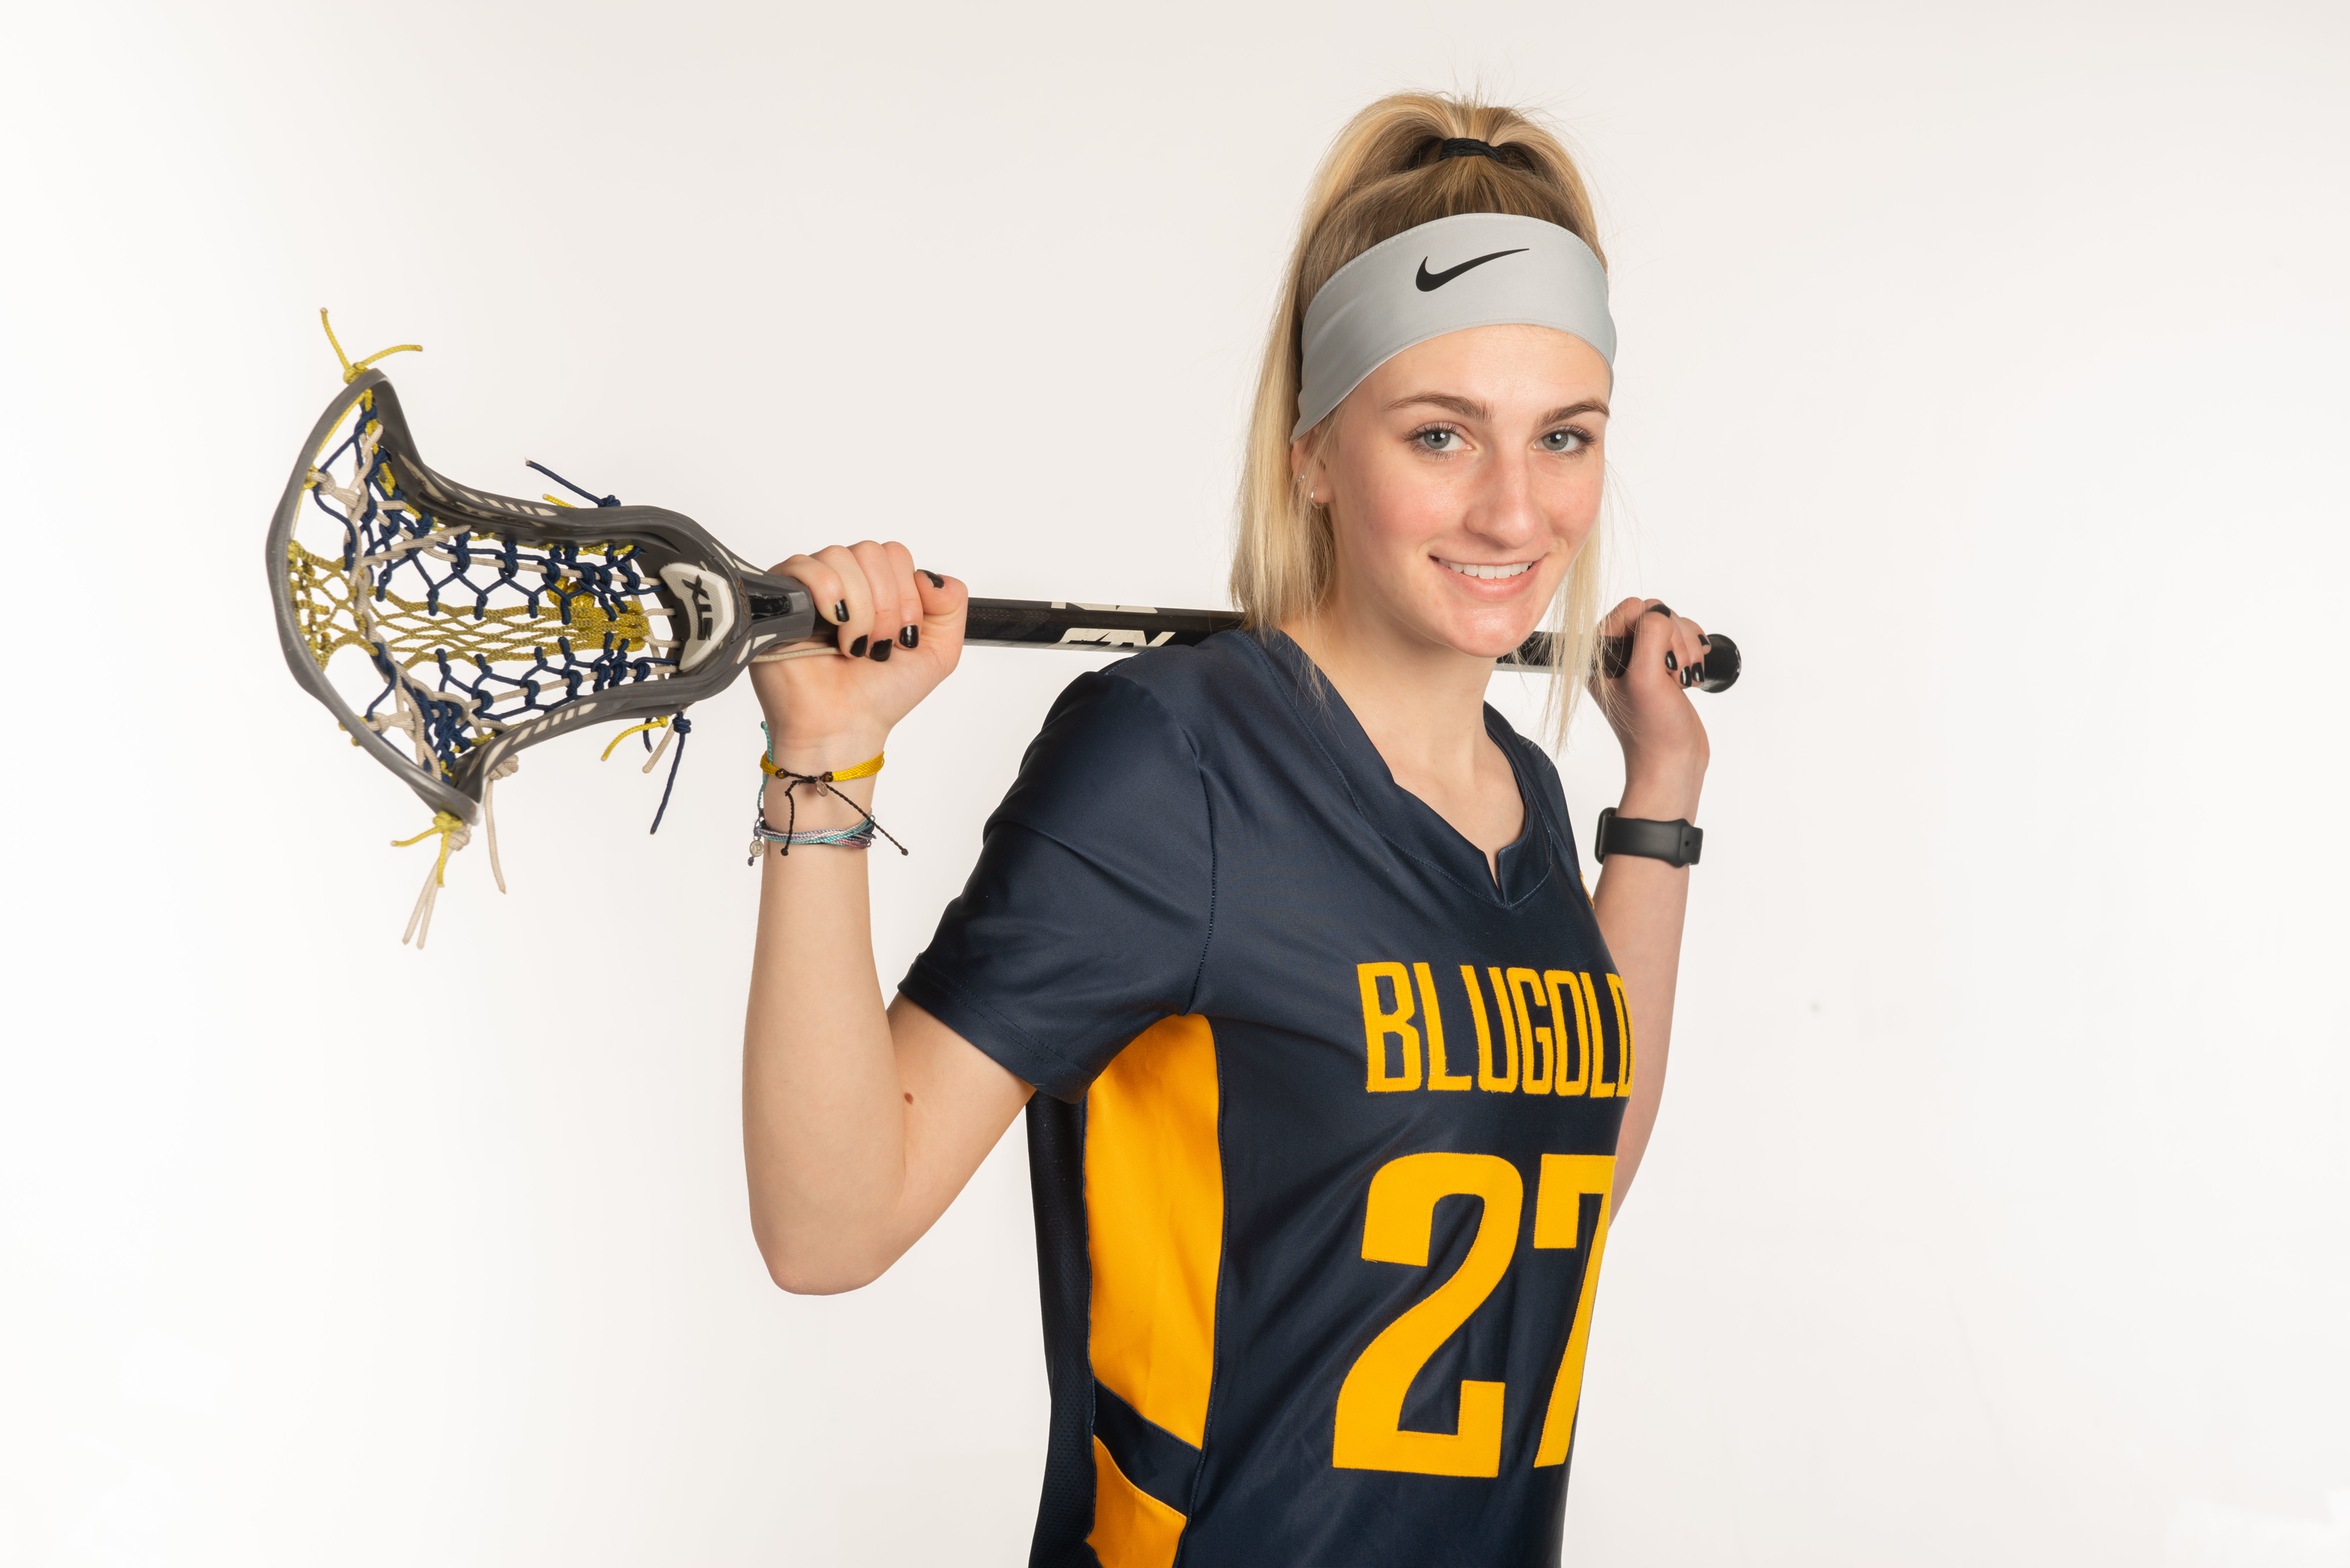 Women's Lacrosse Tallies 26 Goals in Rout Over Auggies